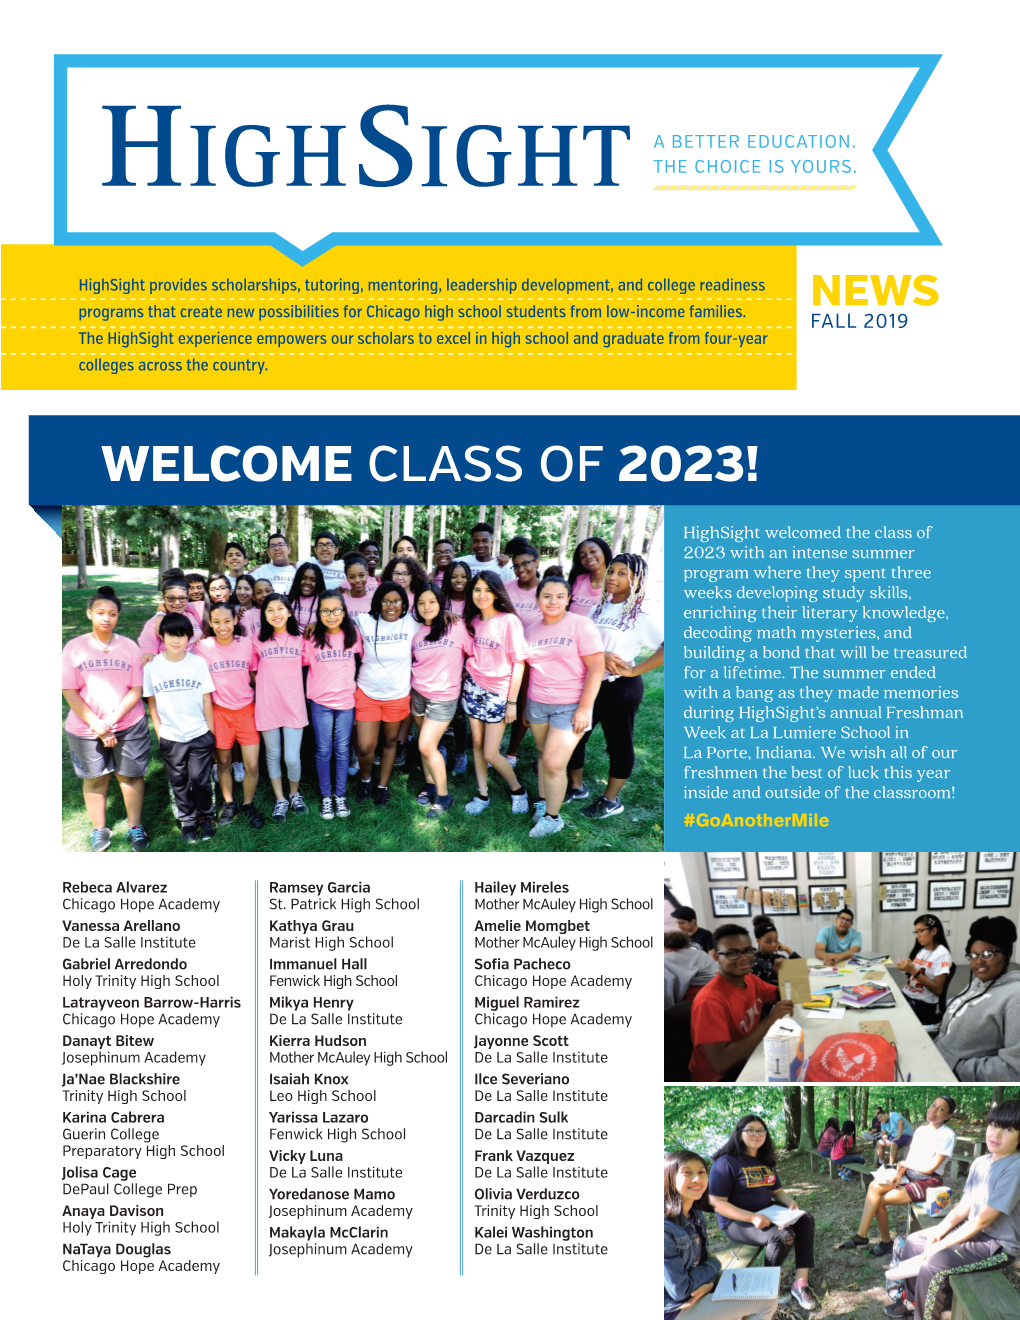 FALL 2019 the Highsight Experience Empowers Our Scholars to Excel in High School and Graduate from Four-Year Colleges Across the Country